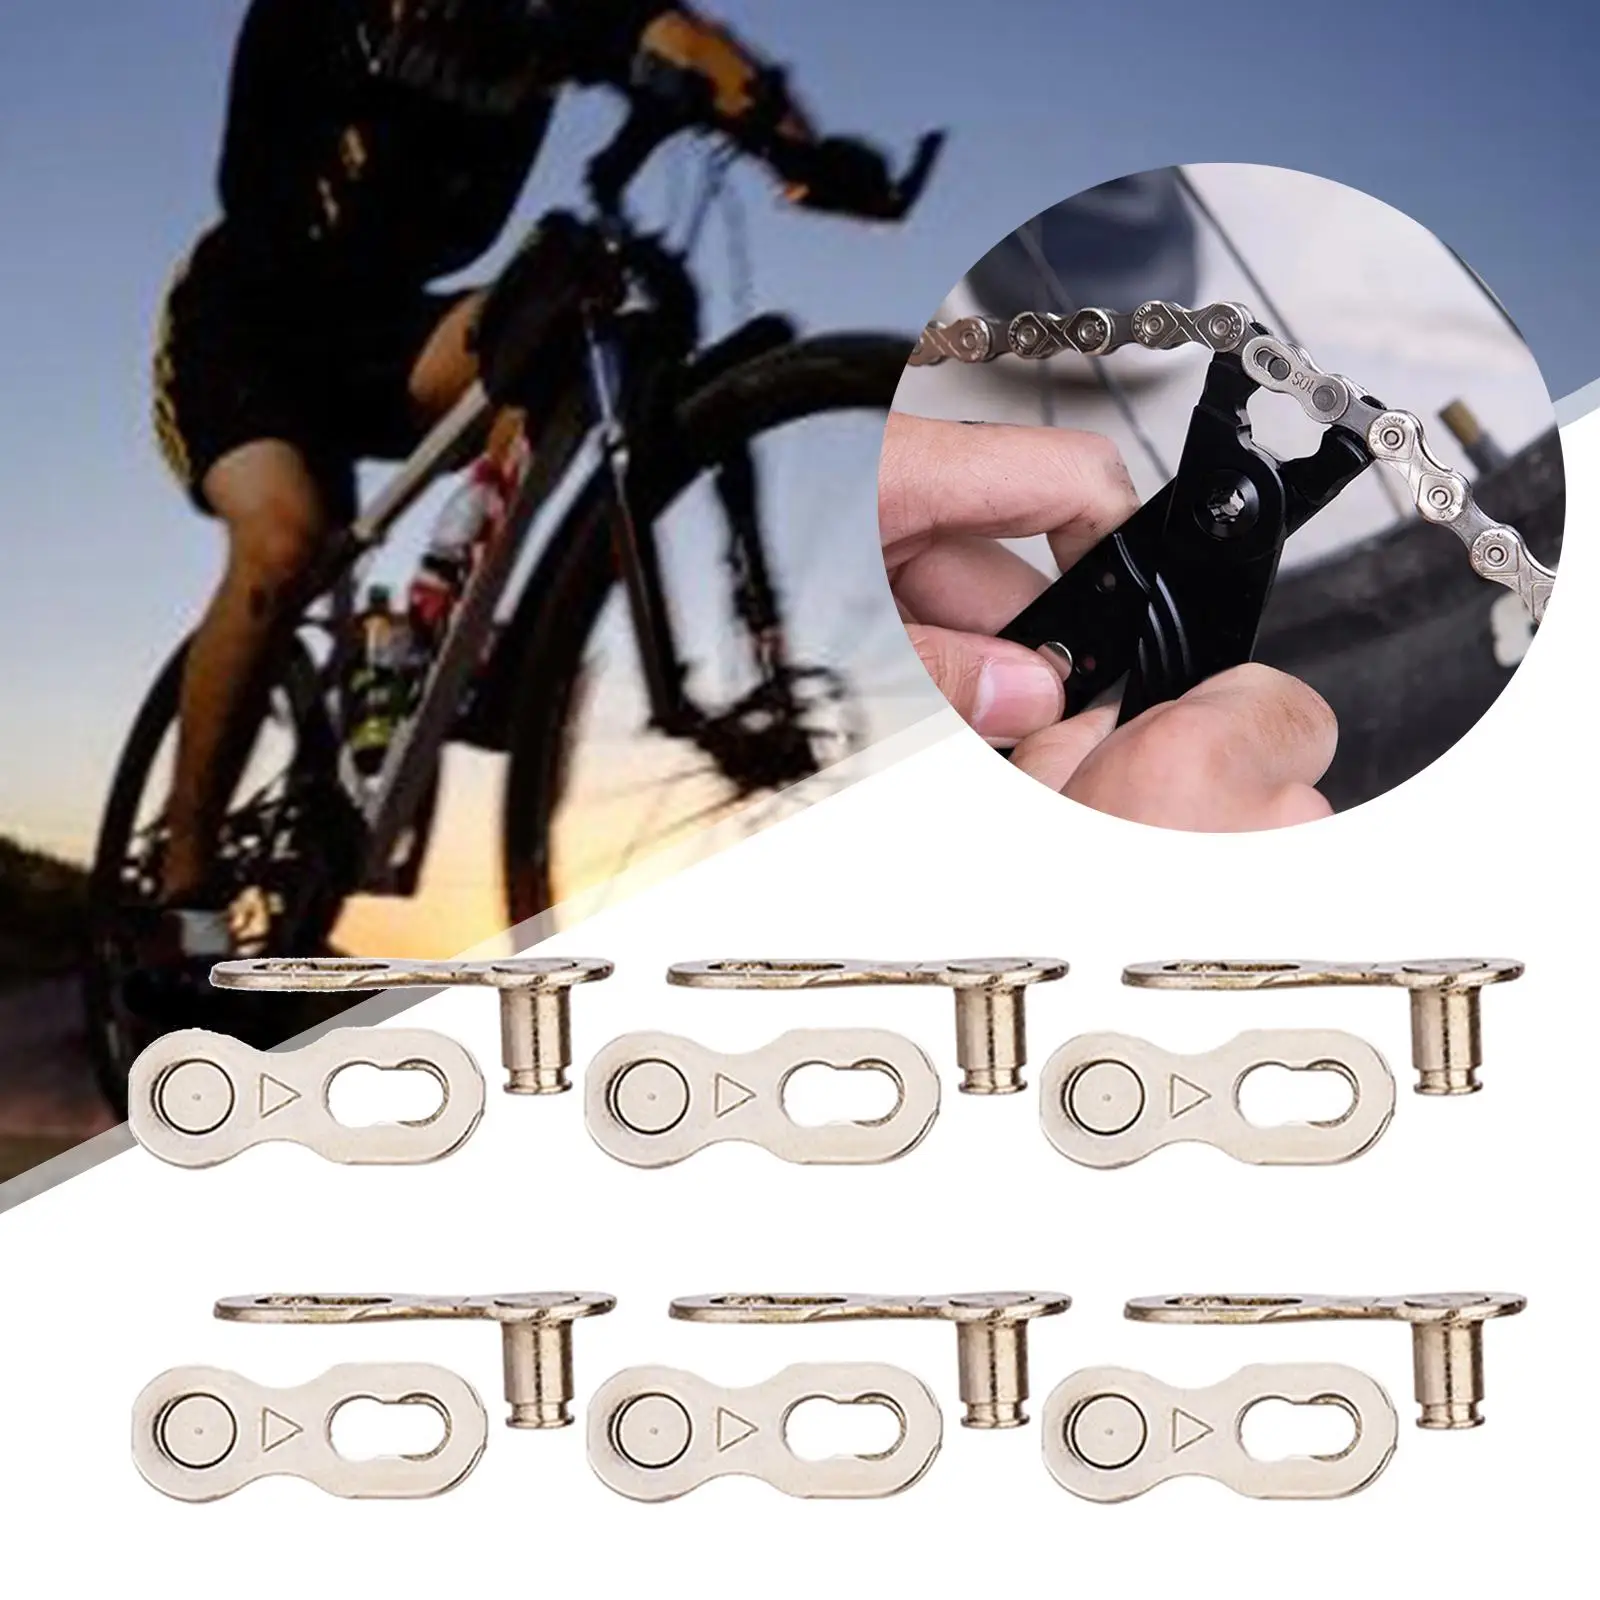  Pairs   Bike Connector  Chain Gear  for 6 7 8   Repair Replacement